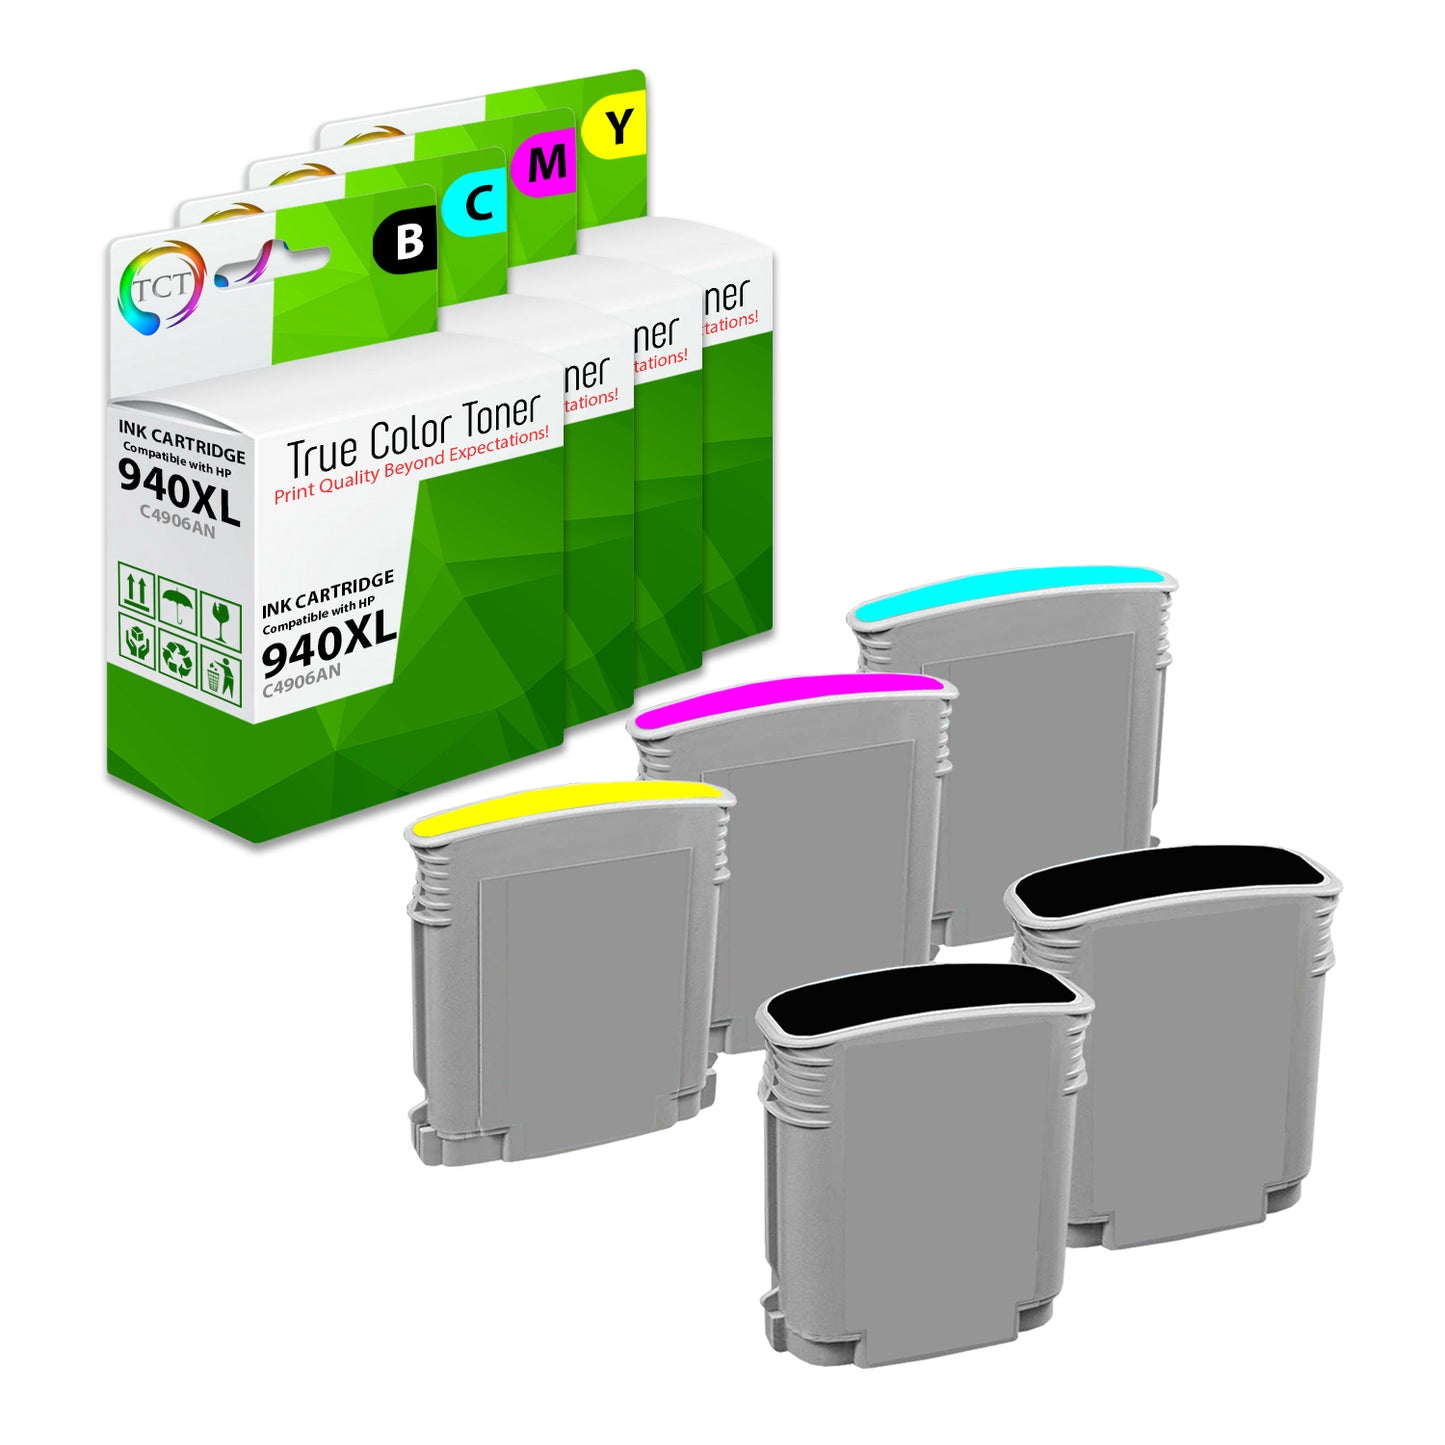 TCT Compatible Ink Cartridge Replacement for the HP 940XL Series - 5 Pack (B, C, M, Y)